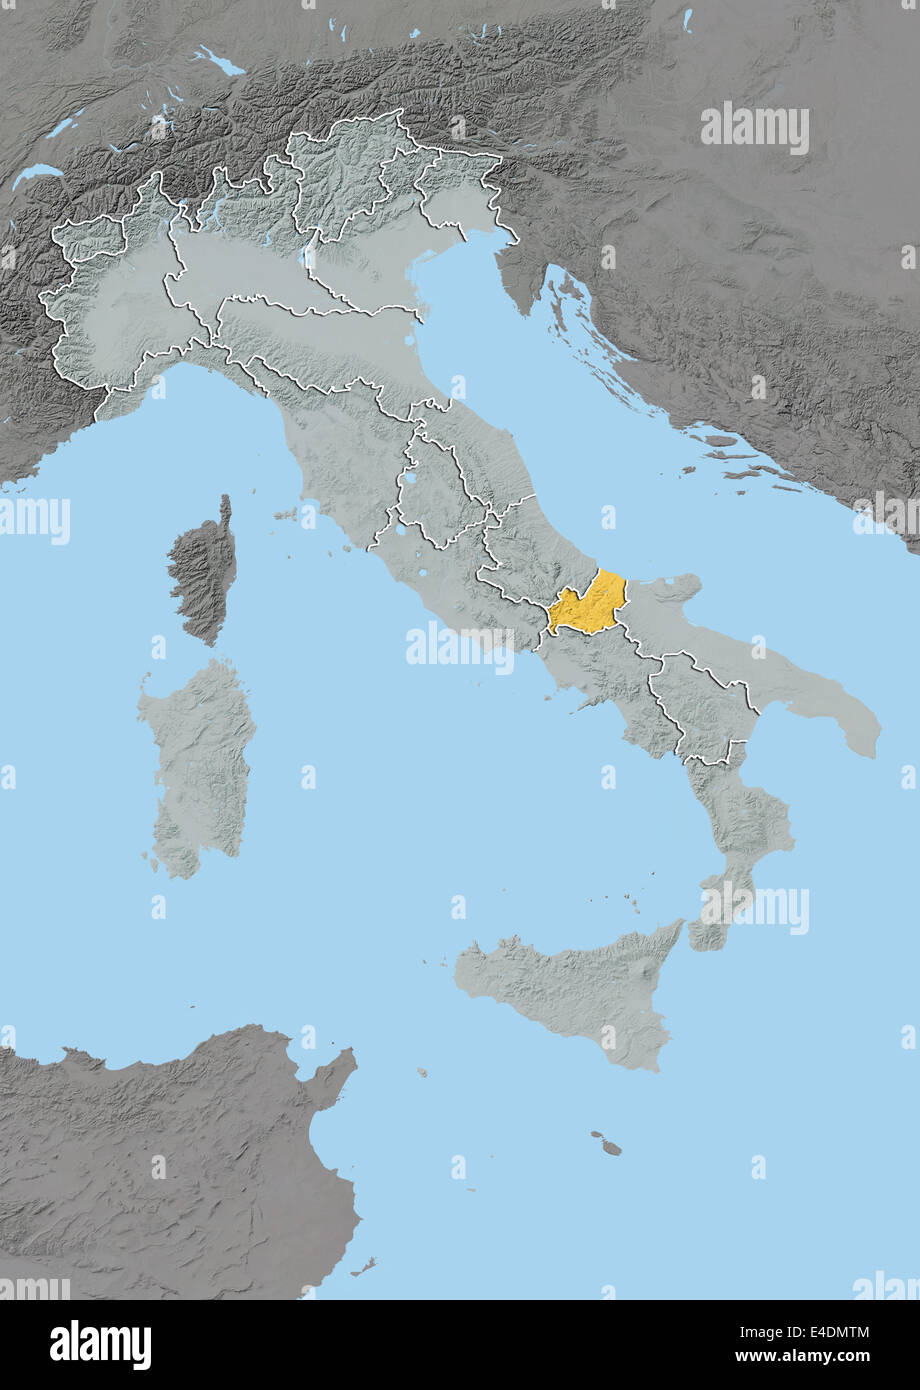 Region of Molise, Italy, Relief Map Stock Photo